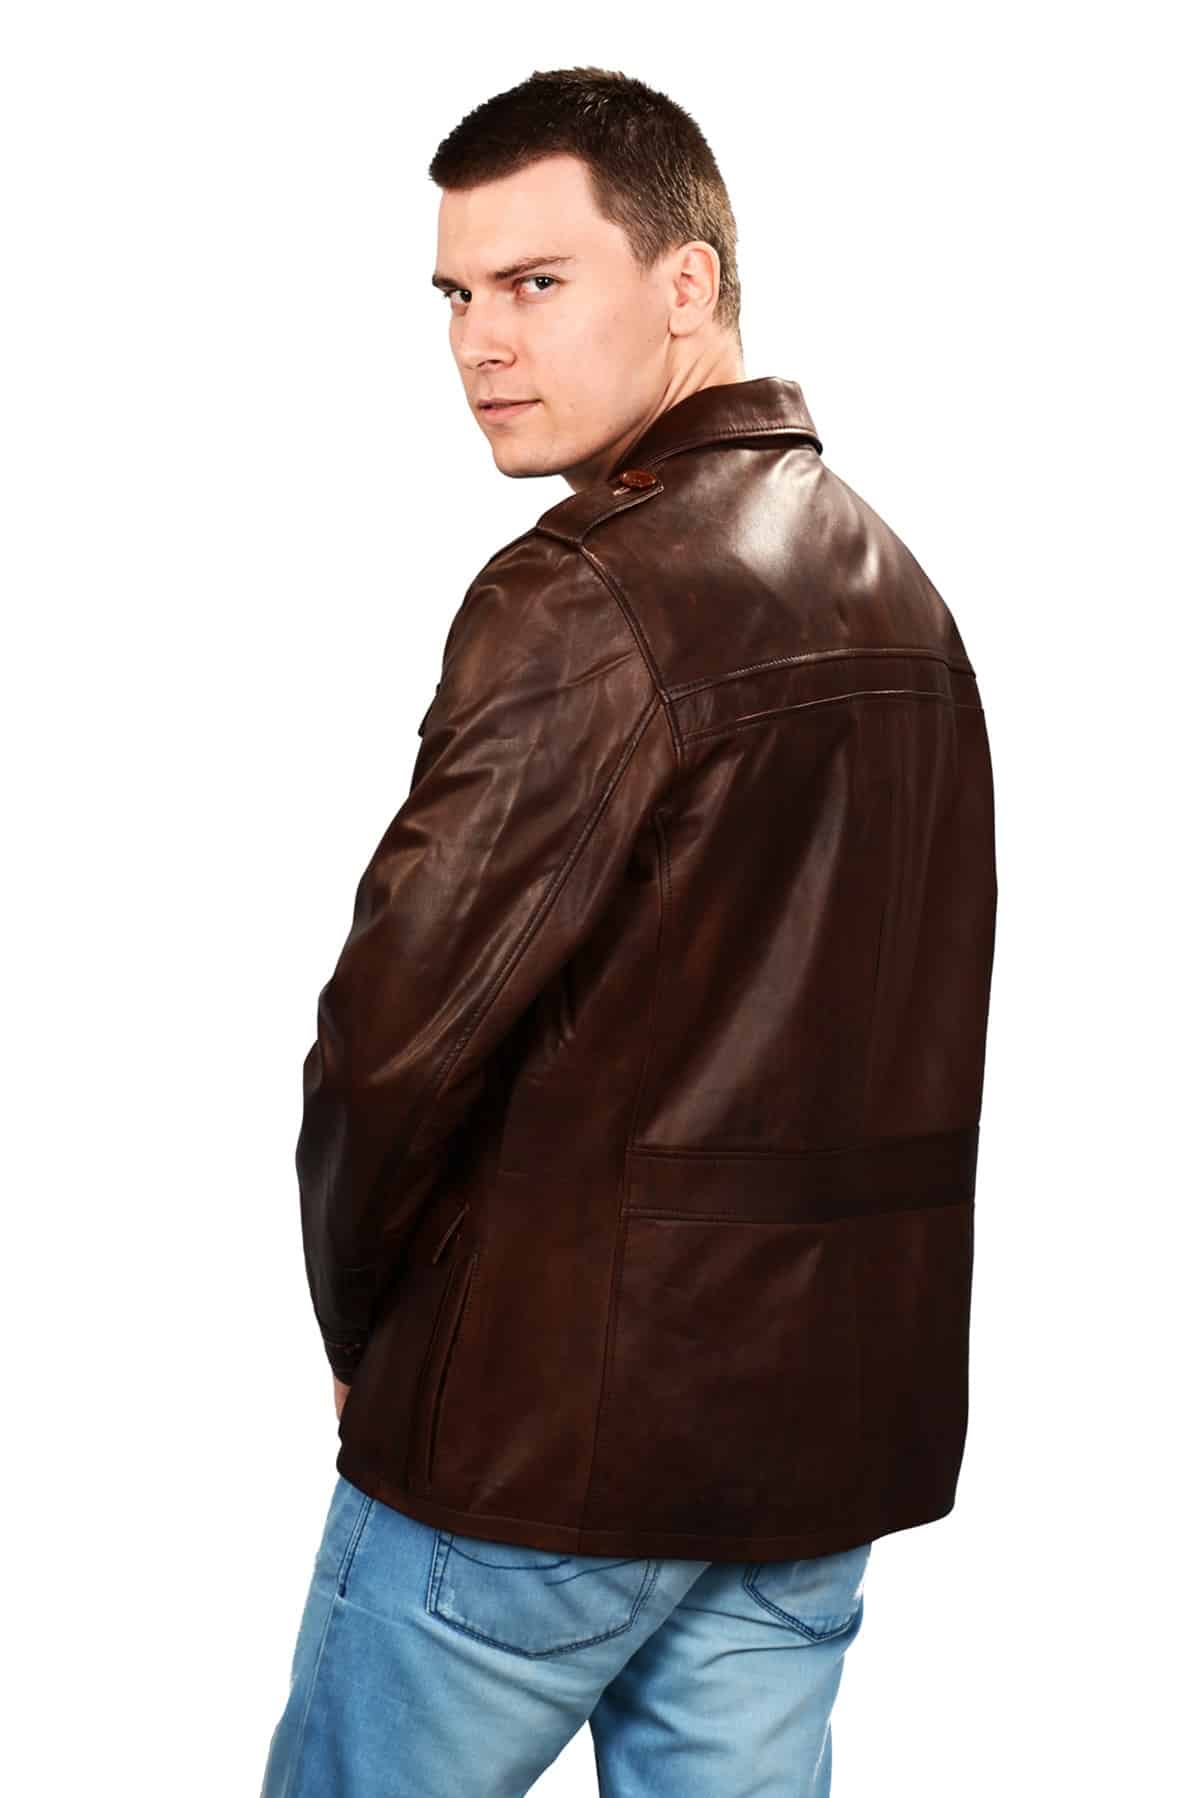 real leather jackets mens cheap